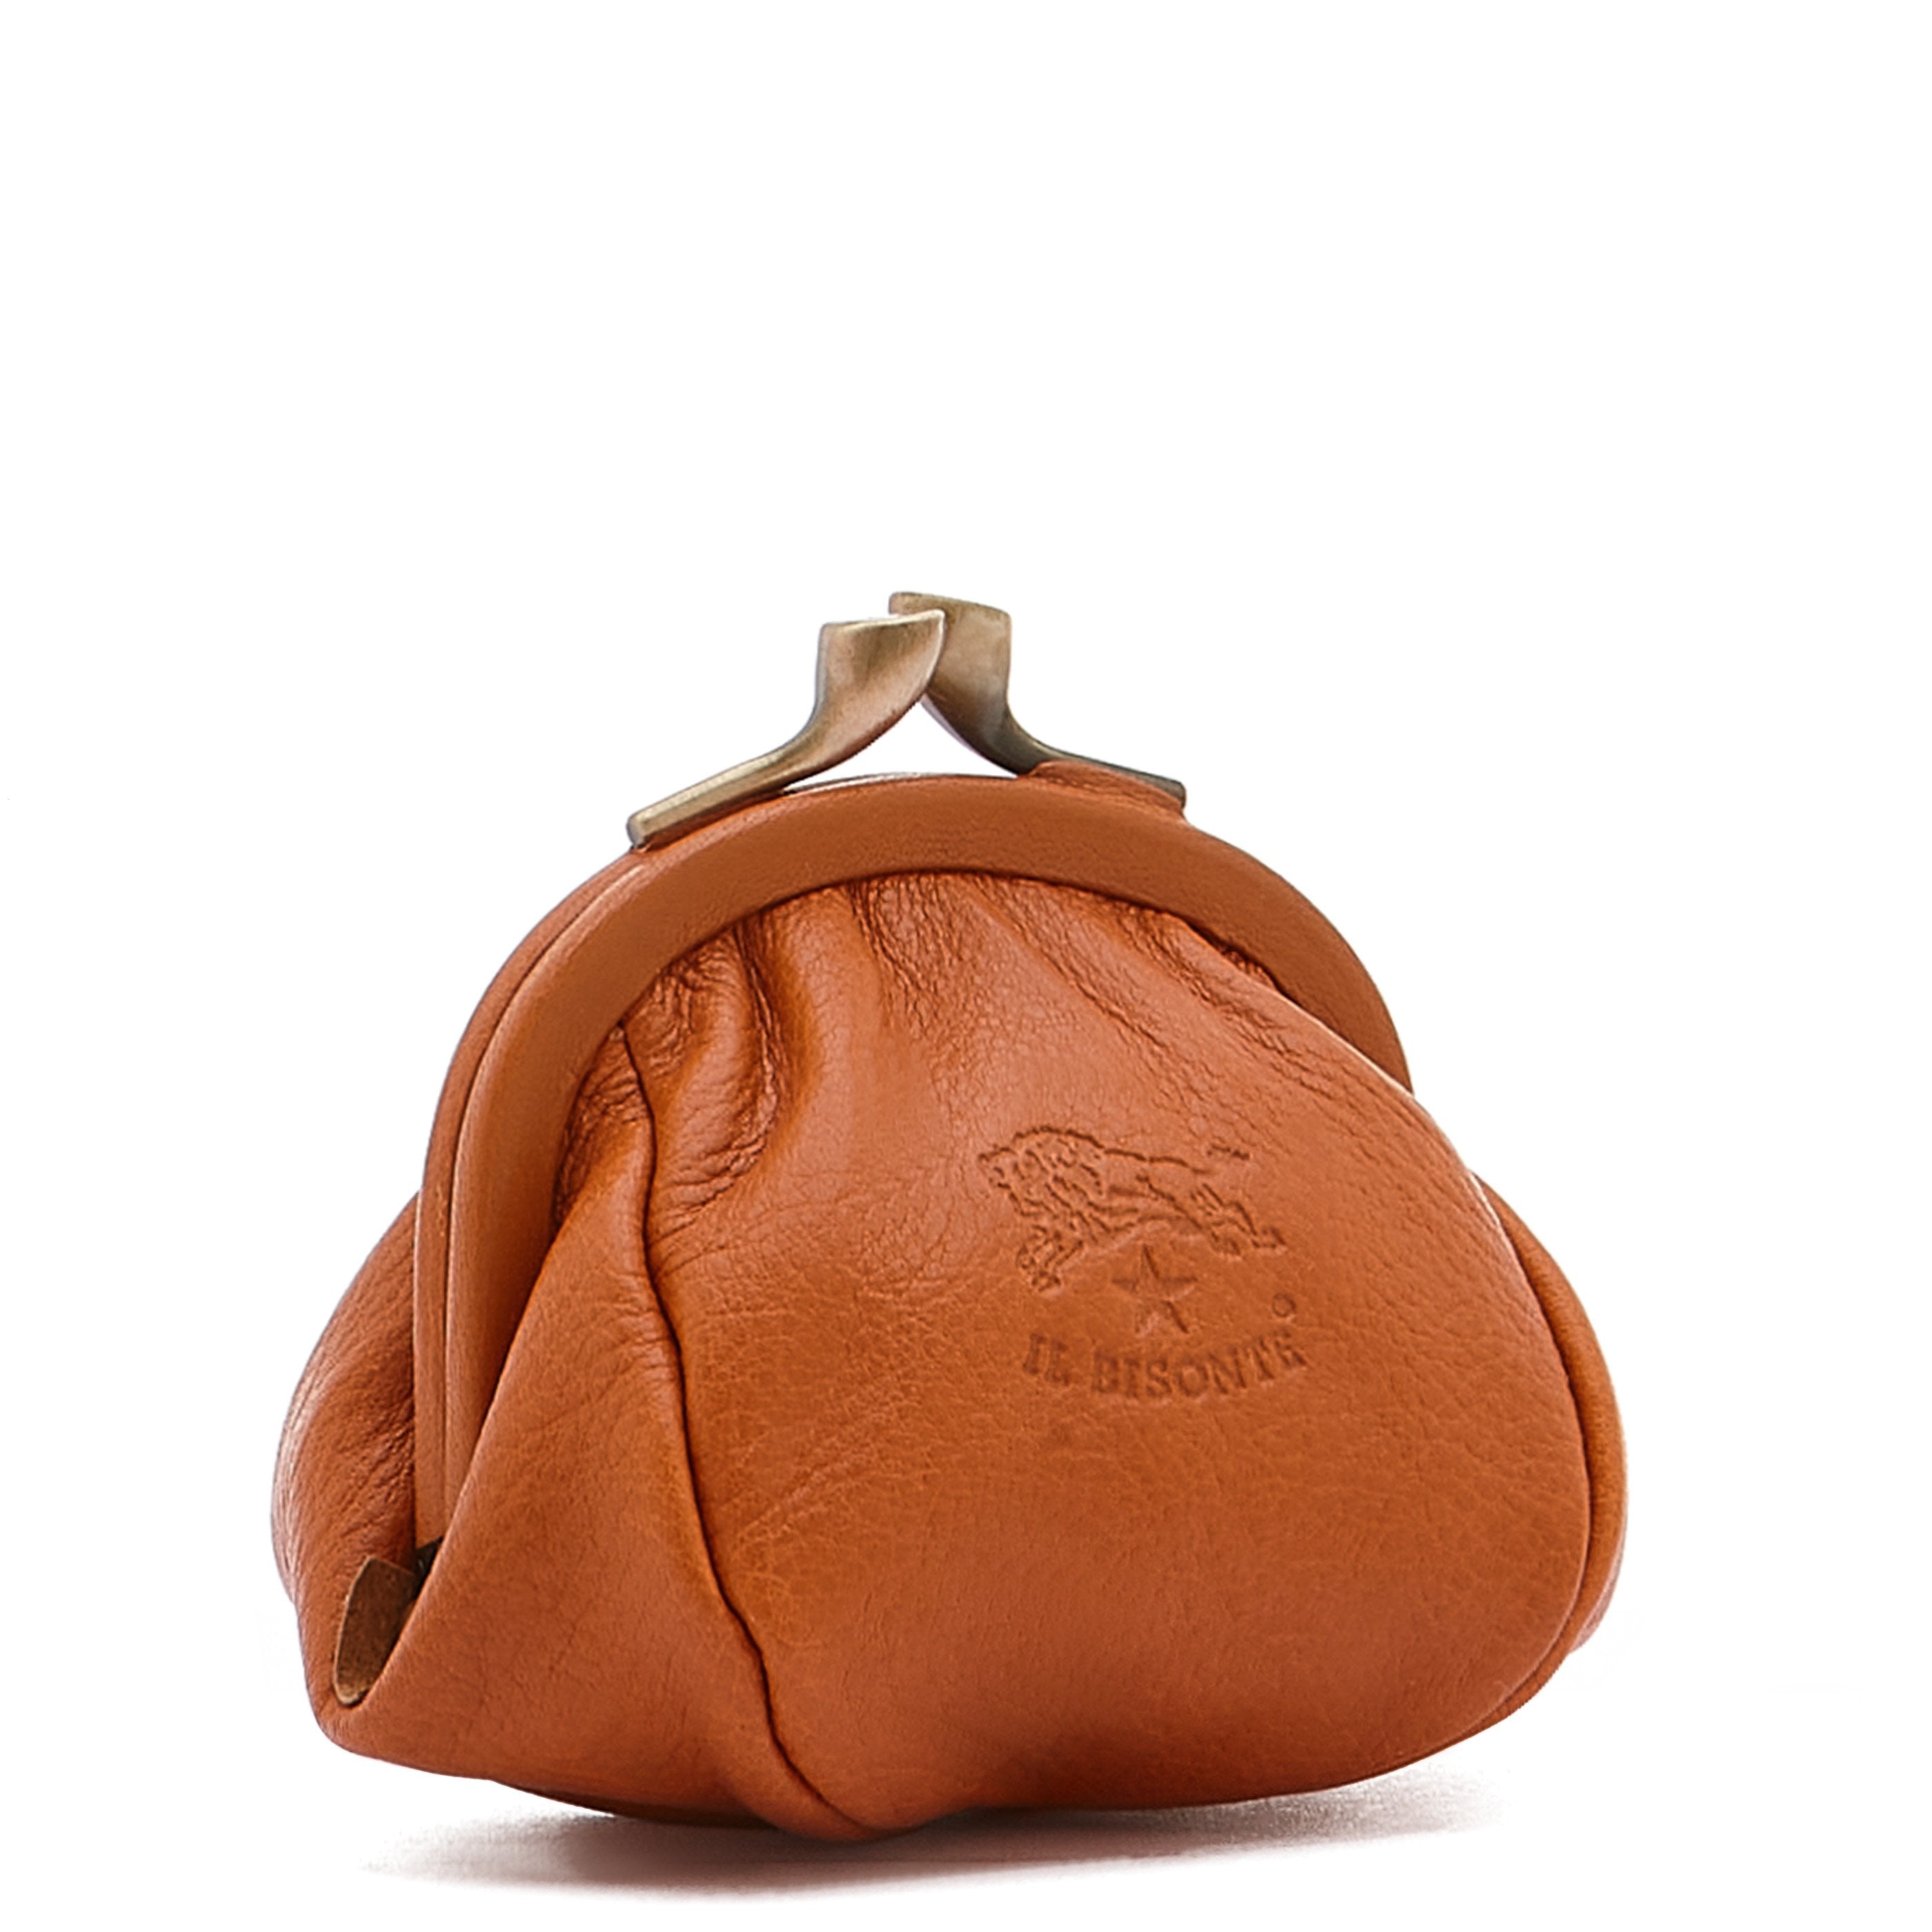 Women's Coin Purse in Calf Leather color Caramel